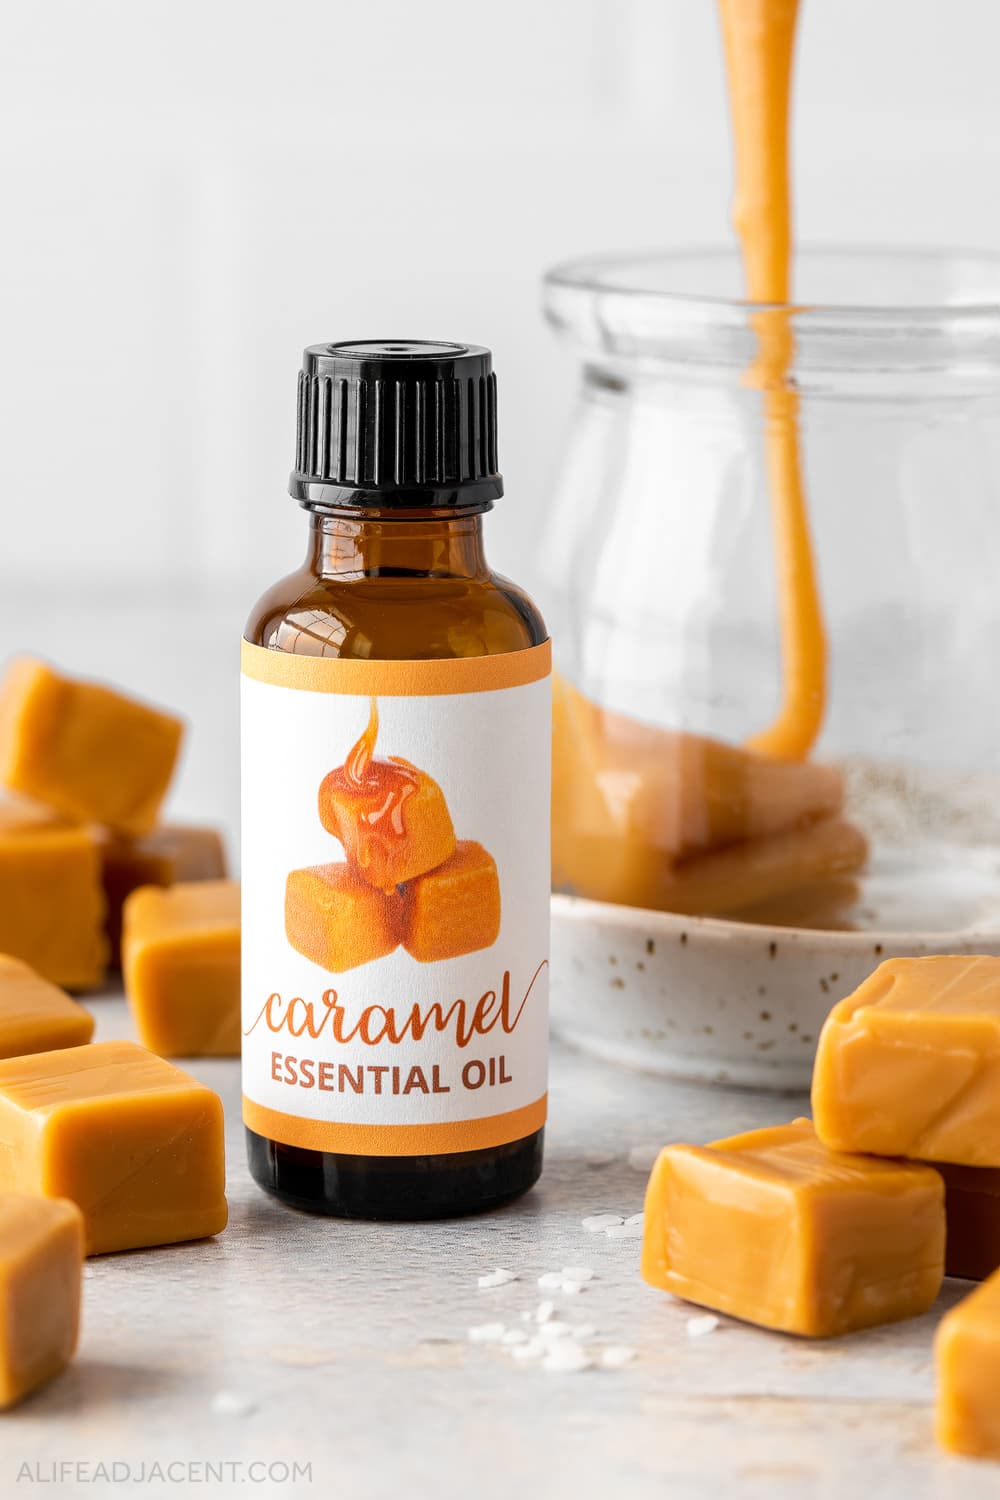 Perfume That Smells Like Caramel: A Heavenly Scent for the Sweet Tooth